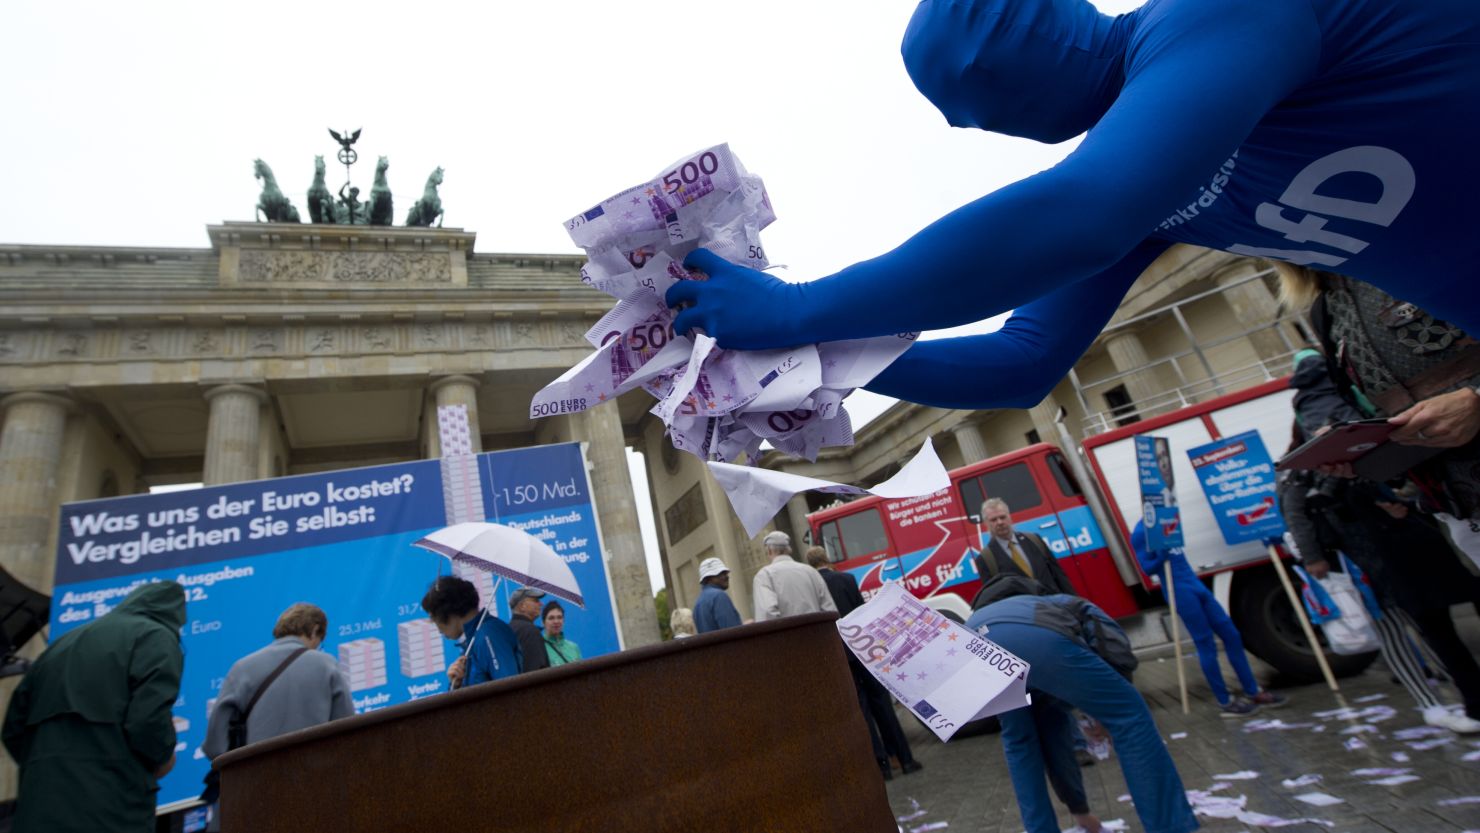 Fake euro notes are thrown onto a fire at a rally for anti-euro party Alternative for Germany (AfD) at Berlin's Brandenburg Gate.